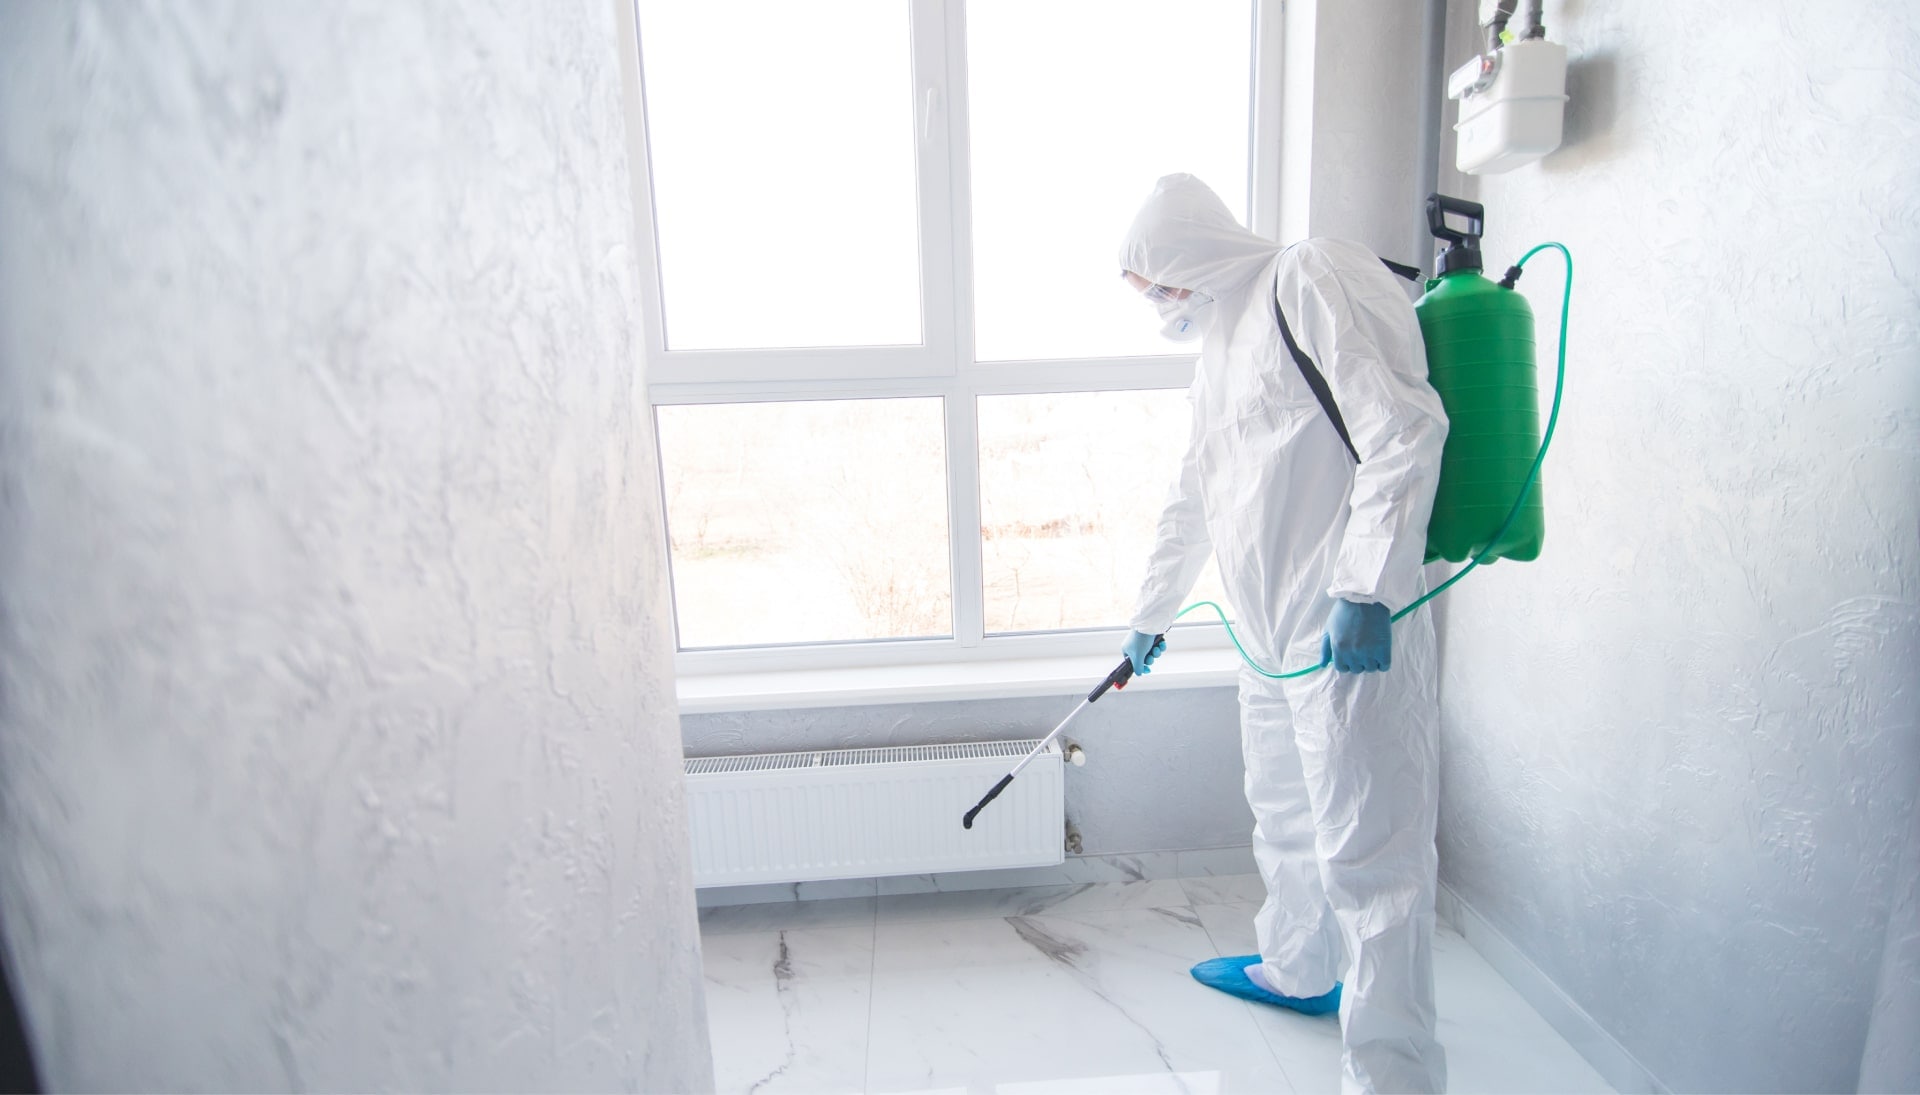 We provide the highest-quality mold inspection, testing, and removal services in the Spokane, Washington area.